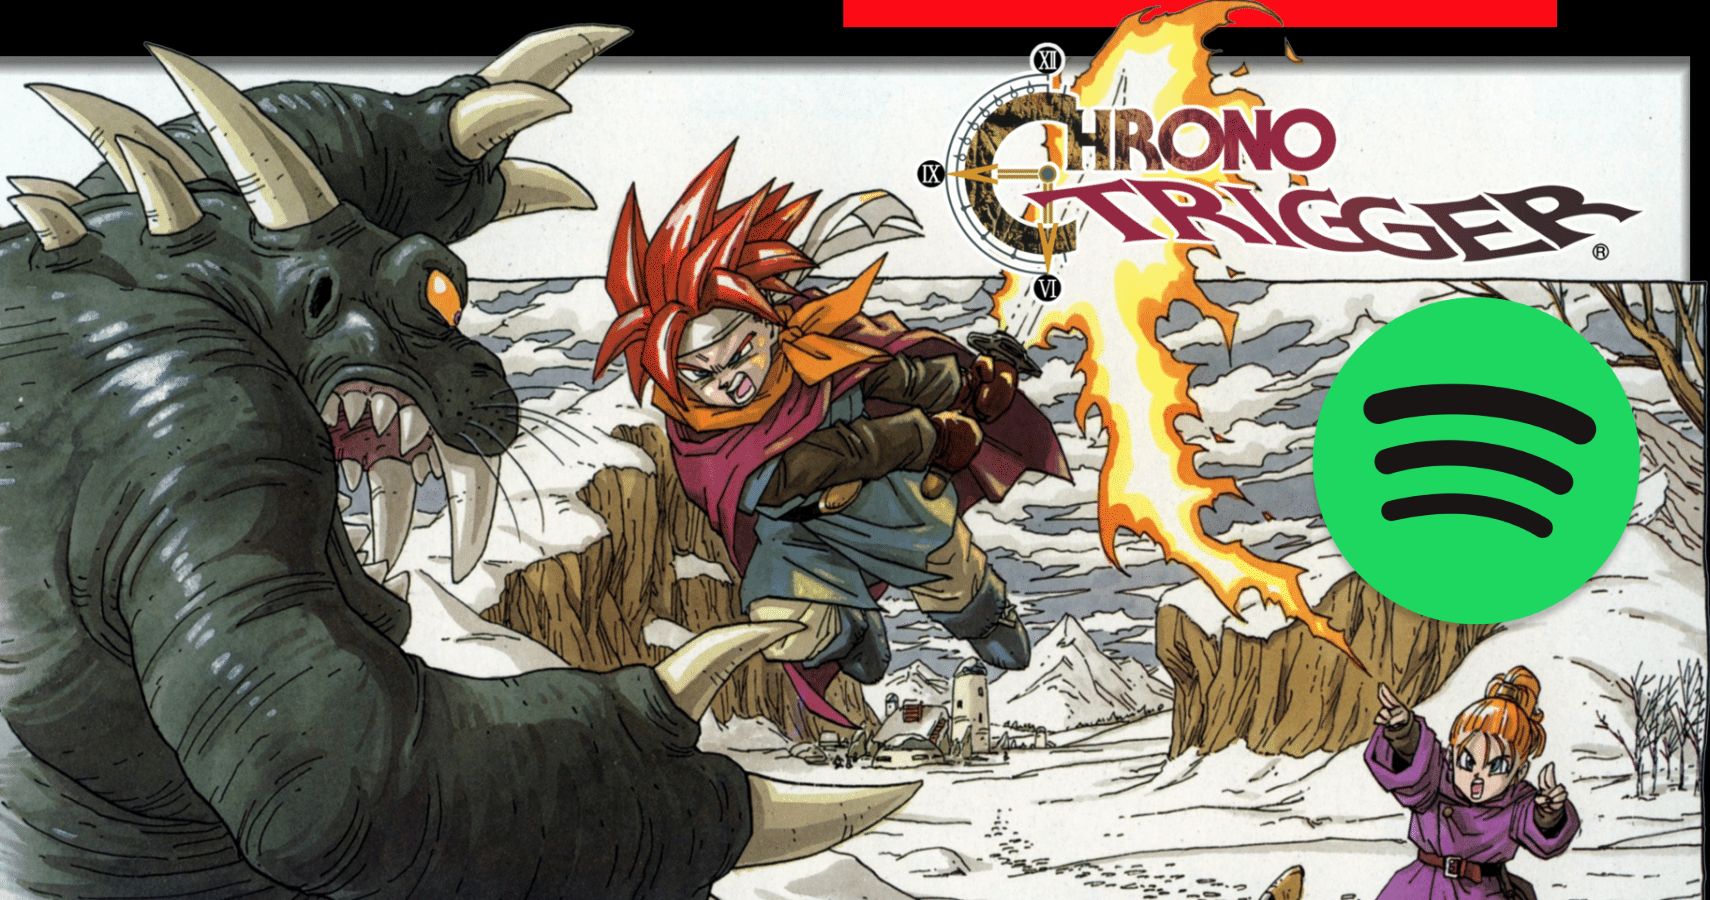 You Can Legally Stream The Chrono Trigger Soundtrack Right Now